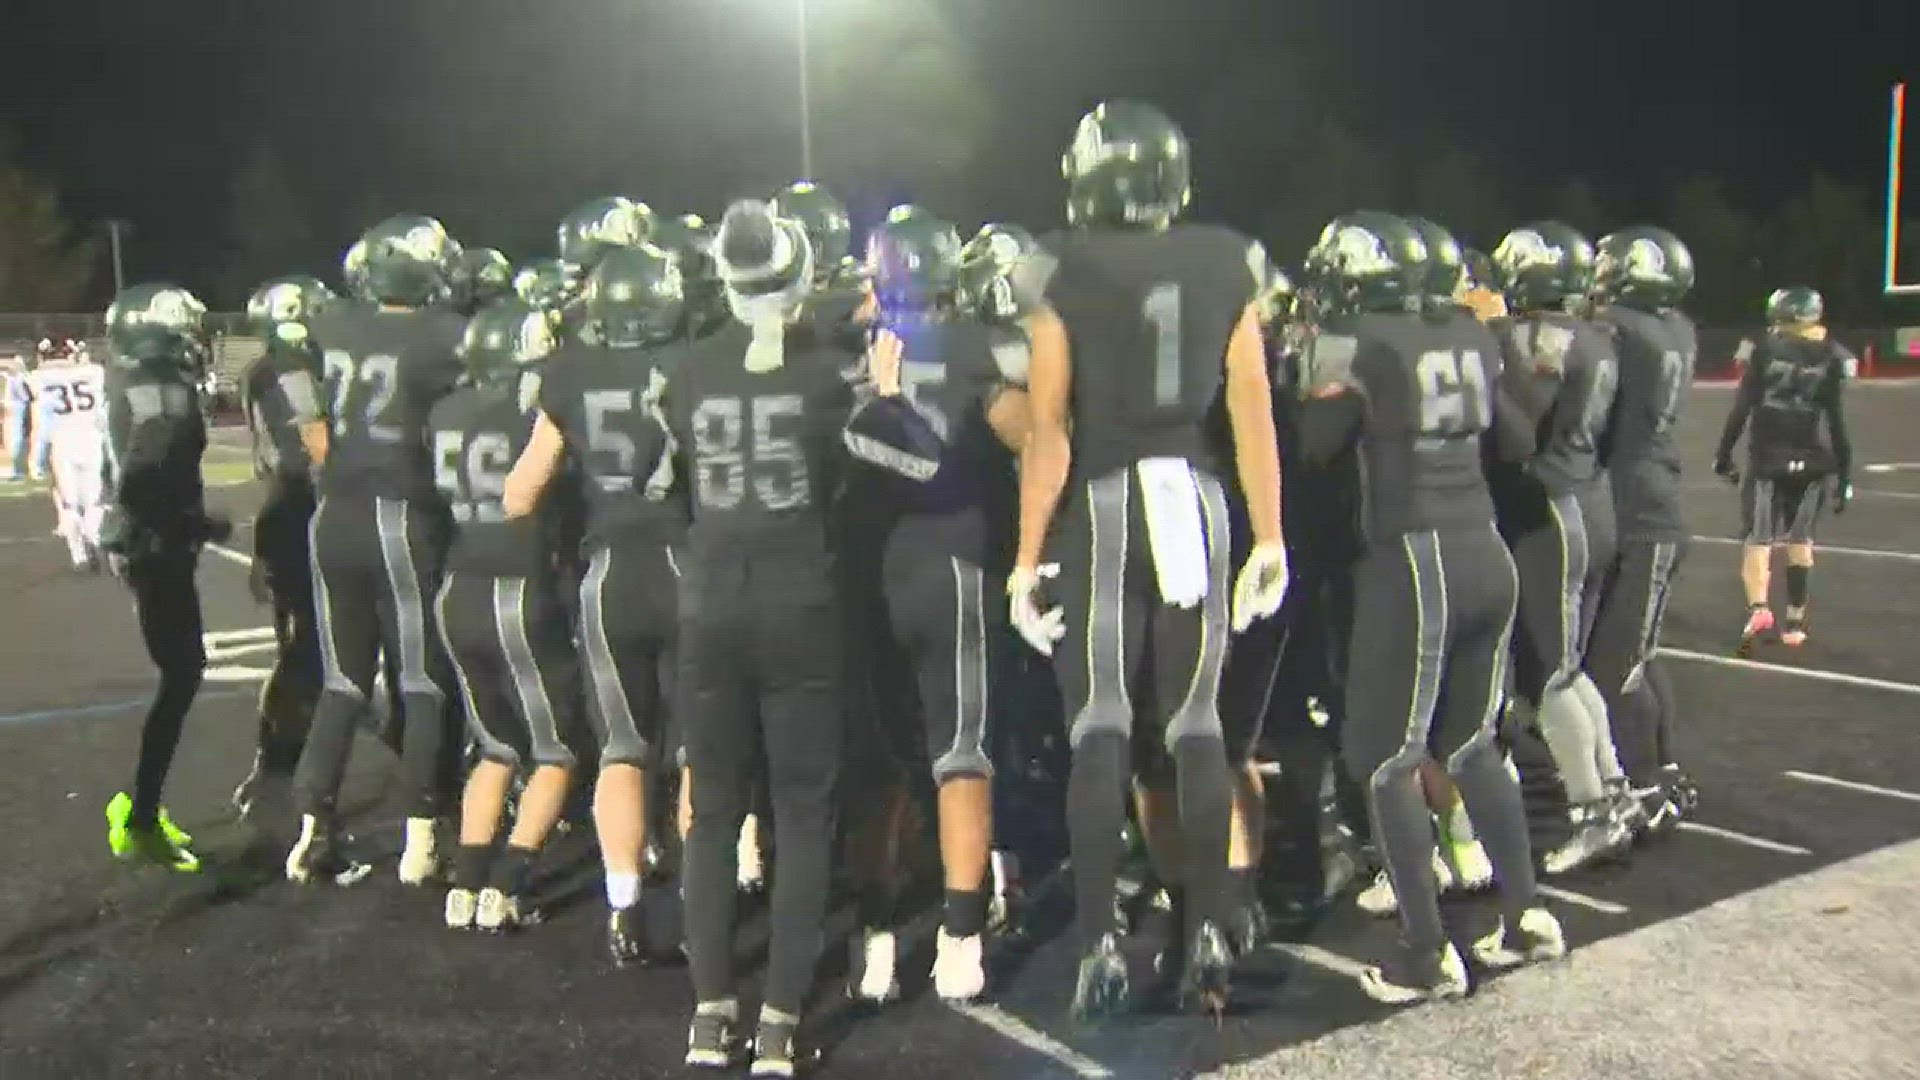 Highlights from No. 4 West Salem's 70-0 win over No. 29 Franklin in the first round of the playoffs on Nov. 3, 2017.